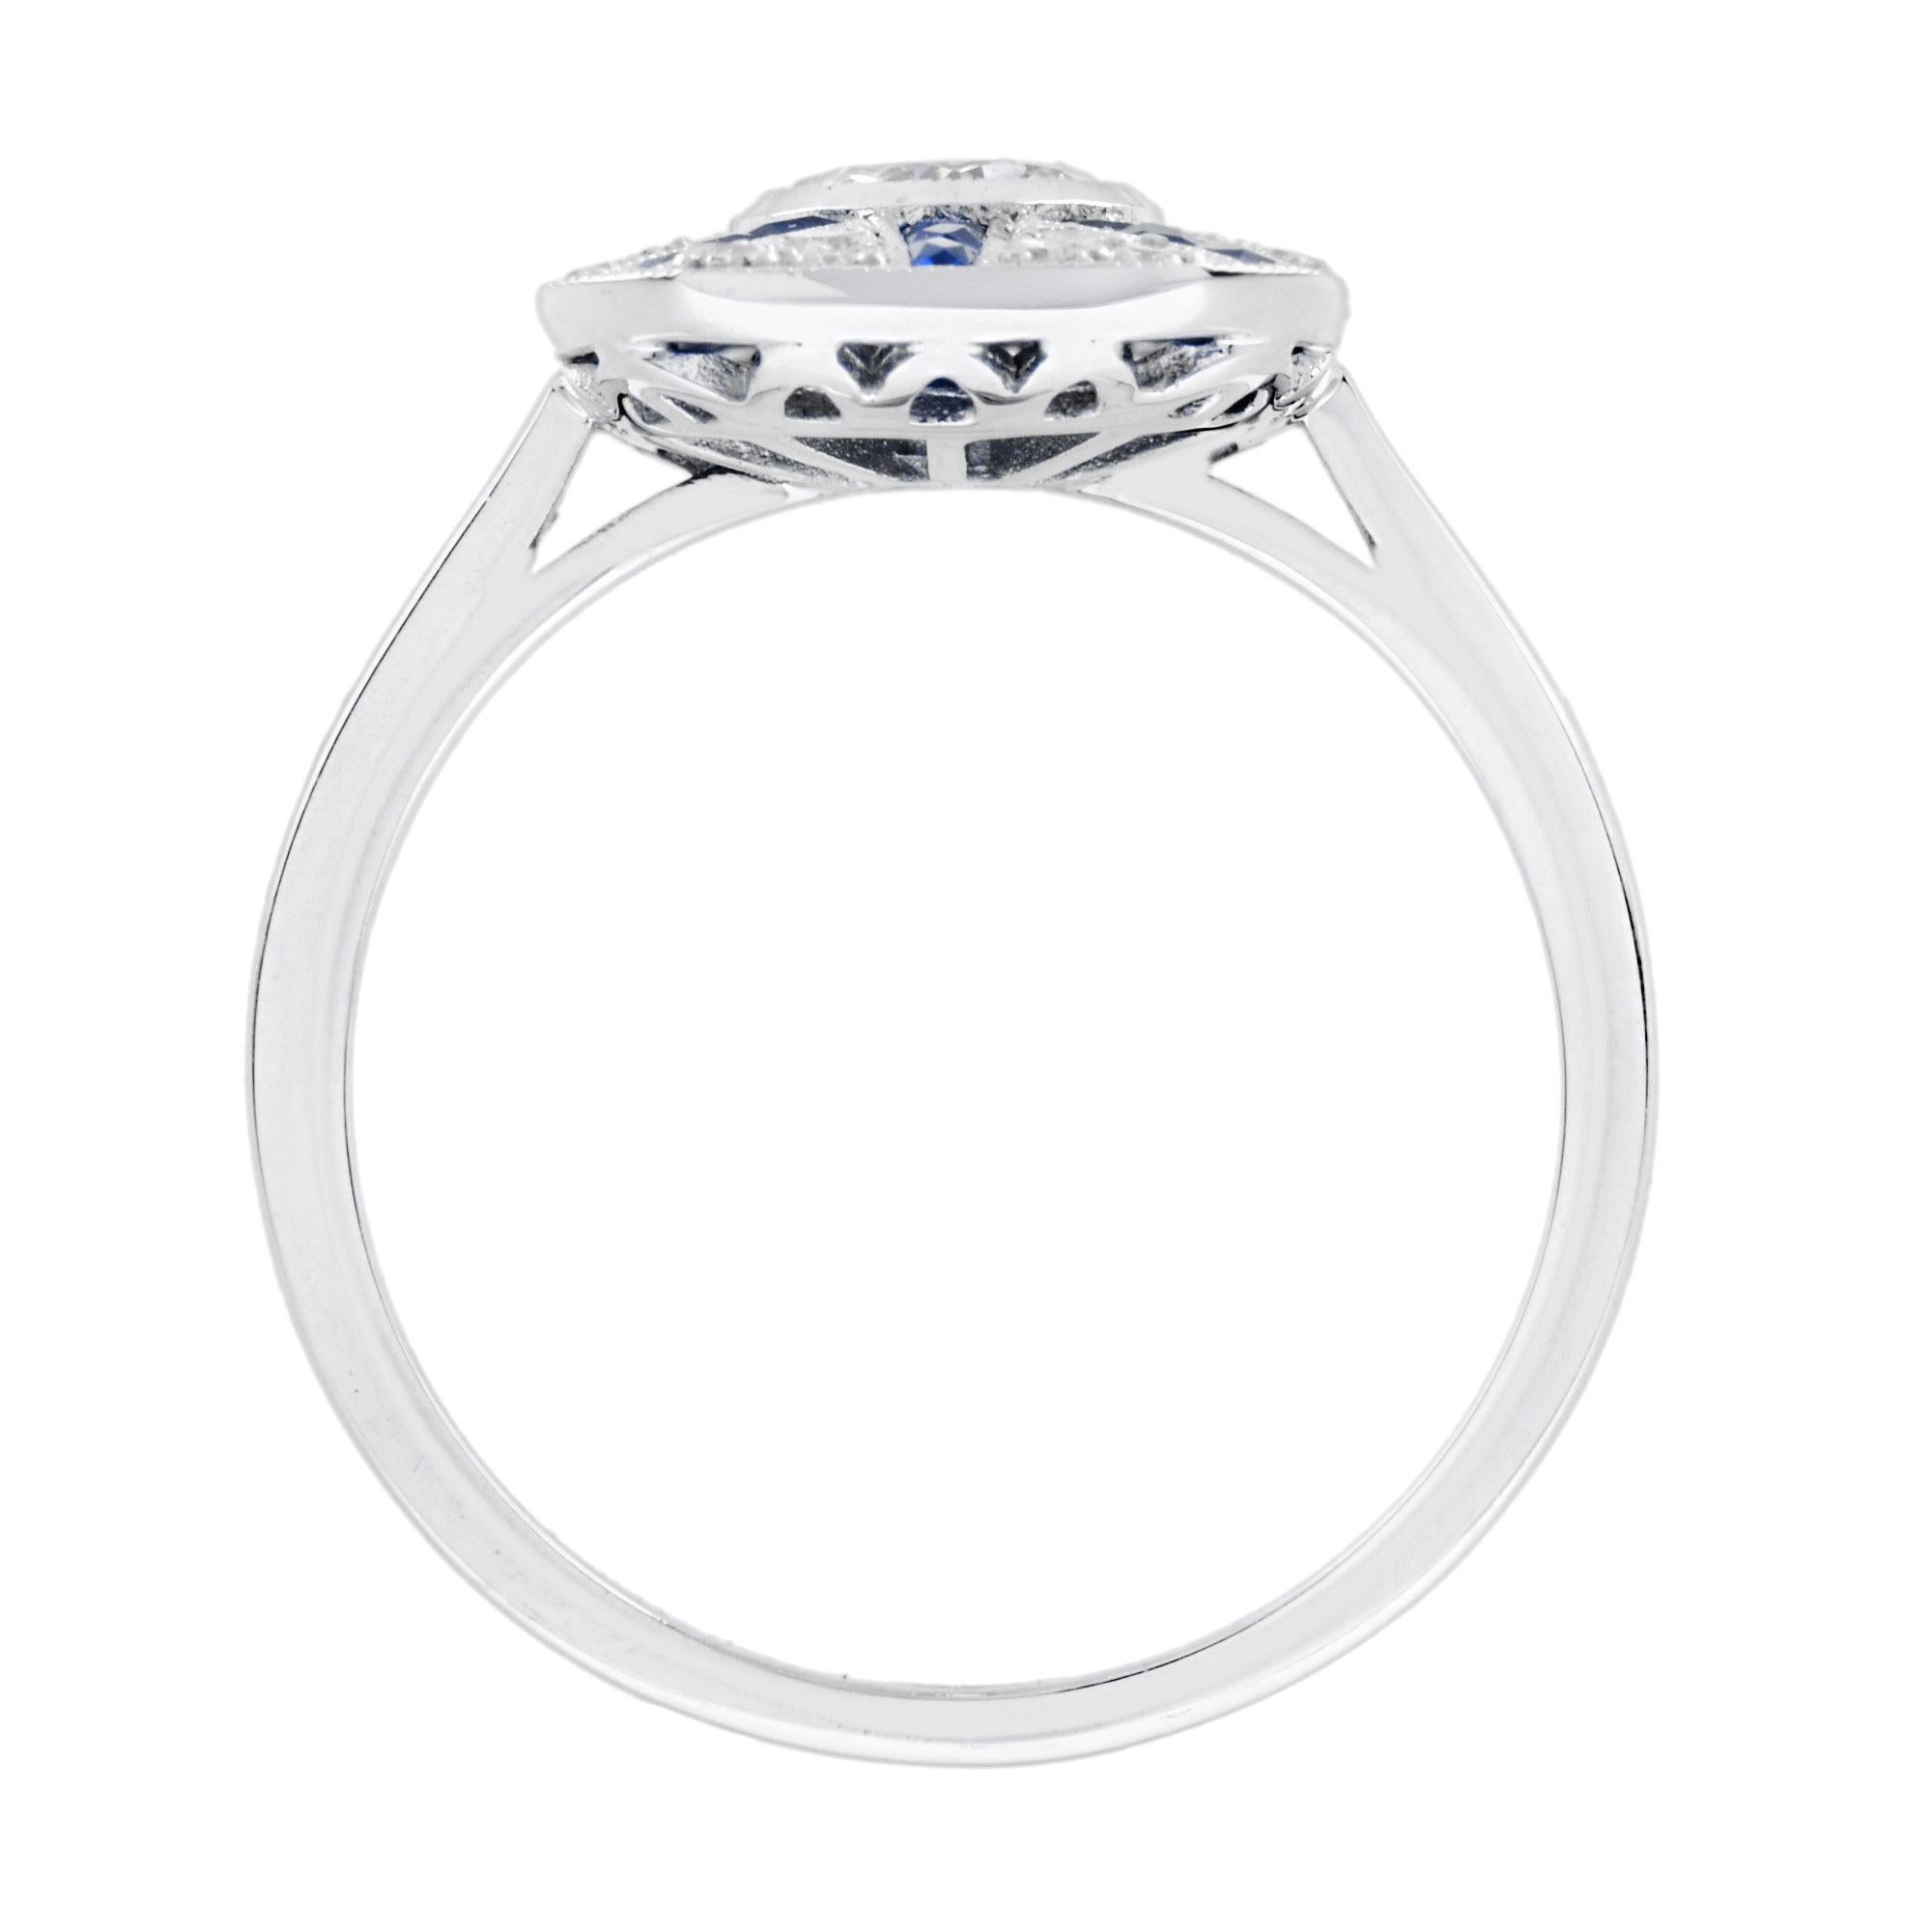 Diamond and Blue Sapphire Art Deco Style Halo Ring in 18K White Gold For Sale 1